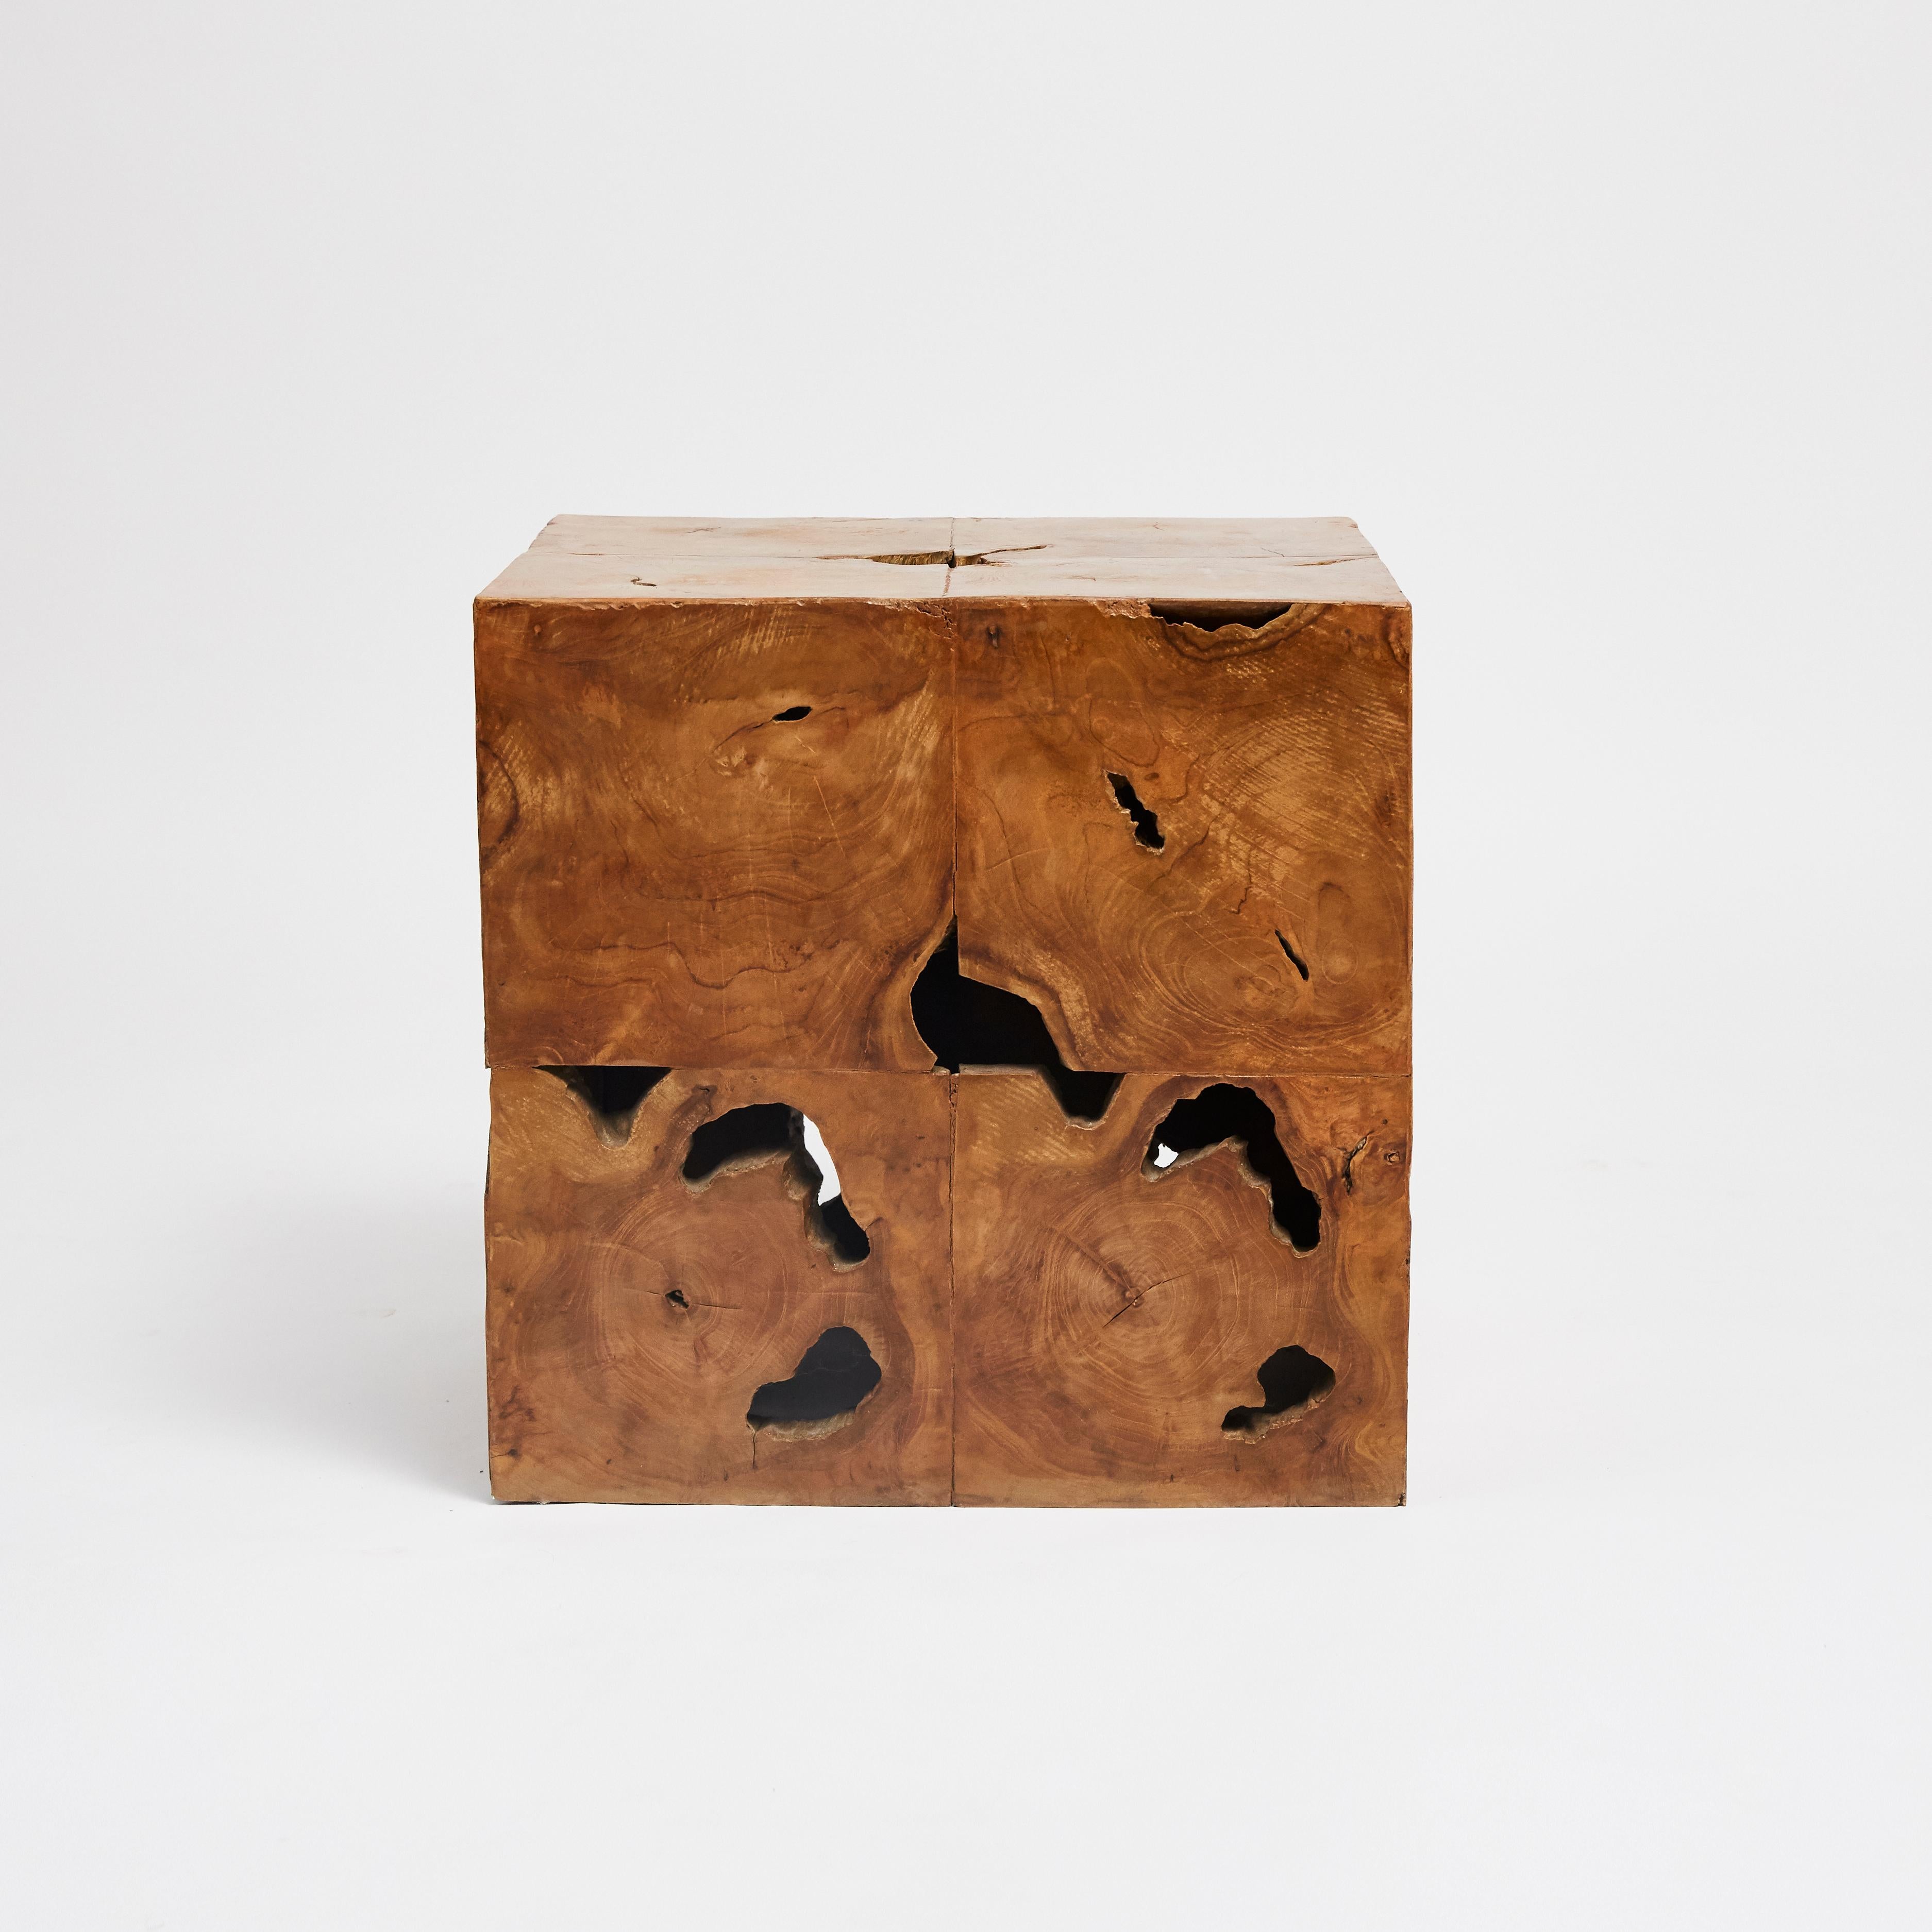 A midcentury cube side table showcasing the exceptional grains of the burl wood. Wear consistent with age and use.

Measures: W 50 cm x D 50 cm x H 50 cm 
W 19.68 in x D 19.68 in x H19.68 in.